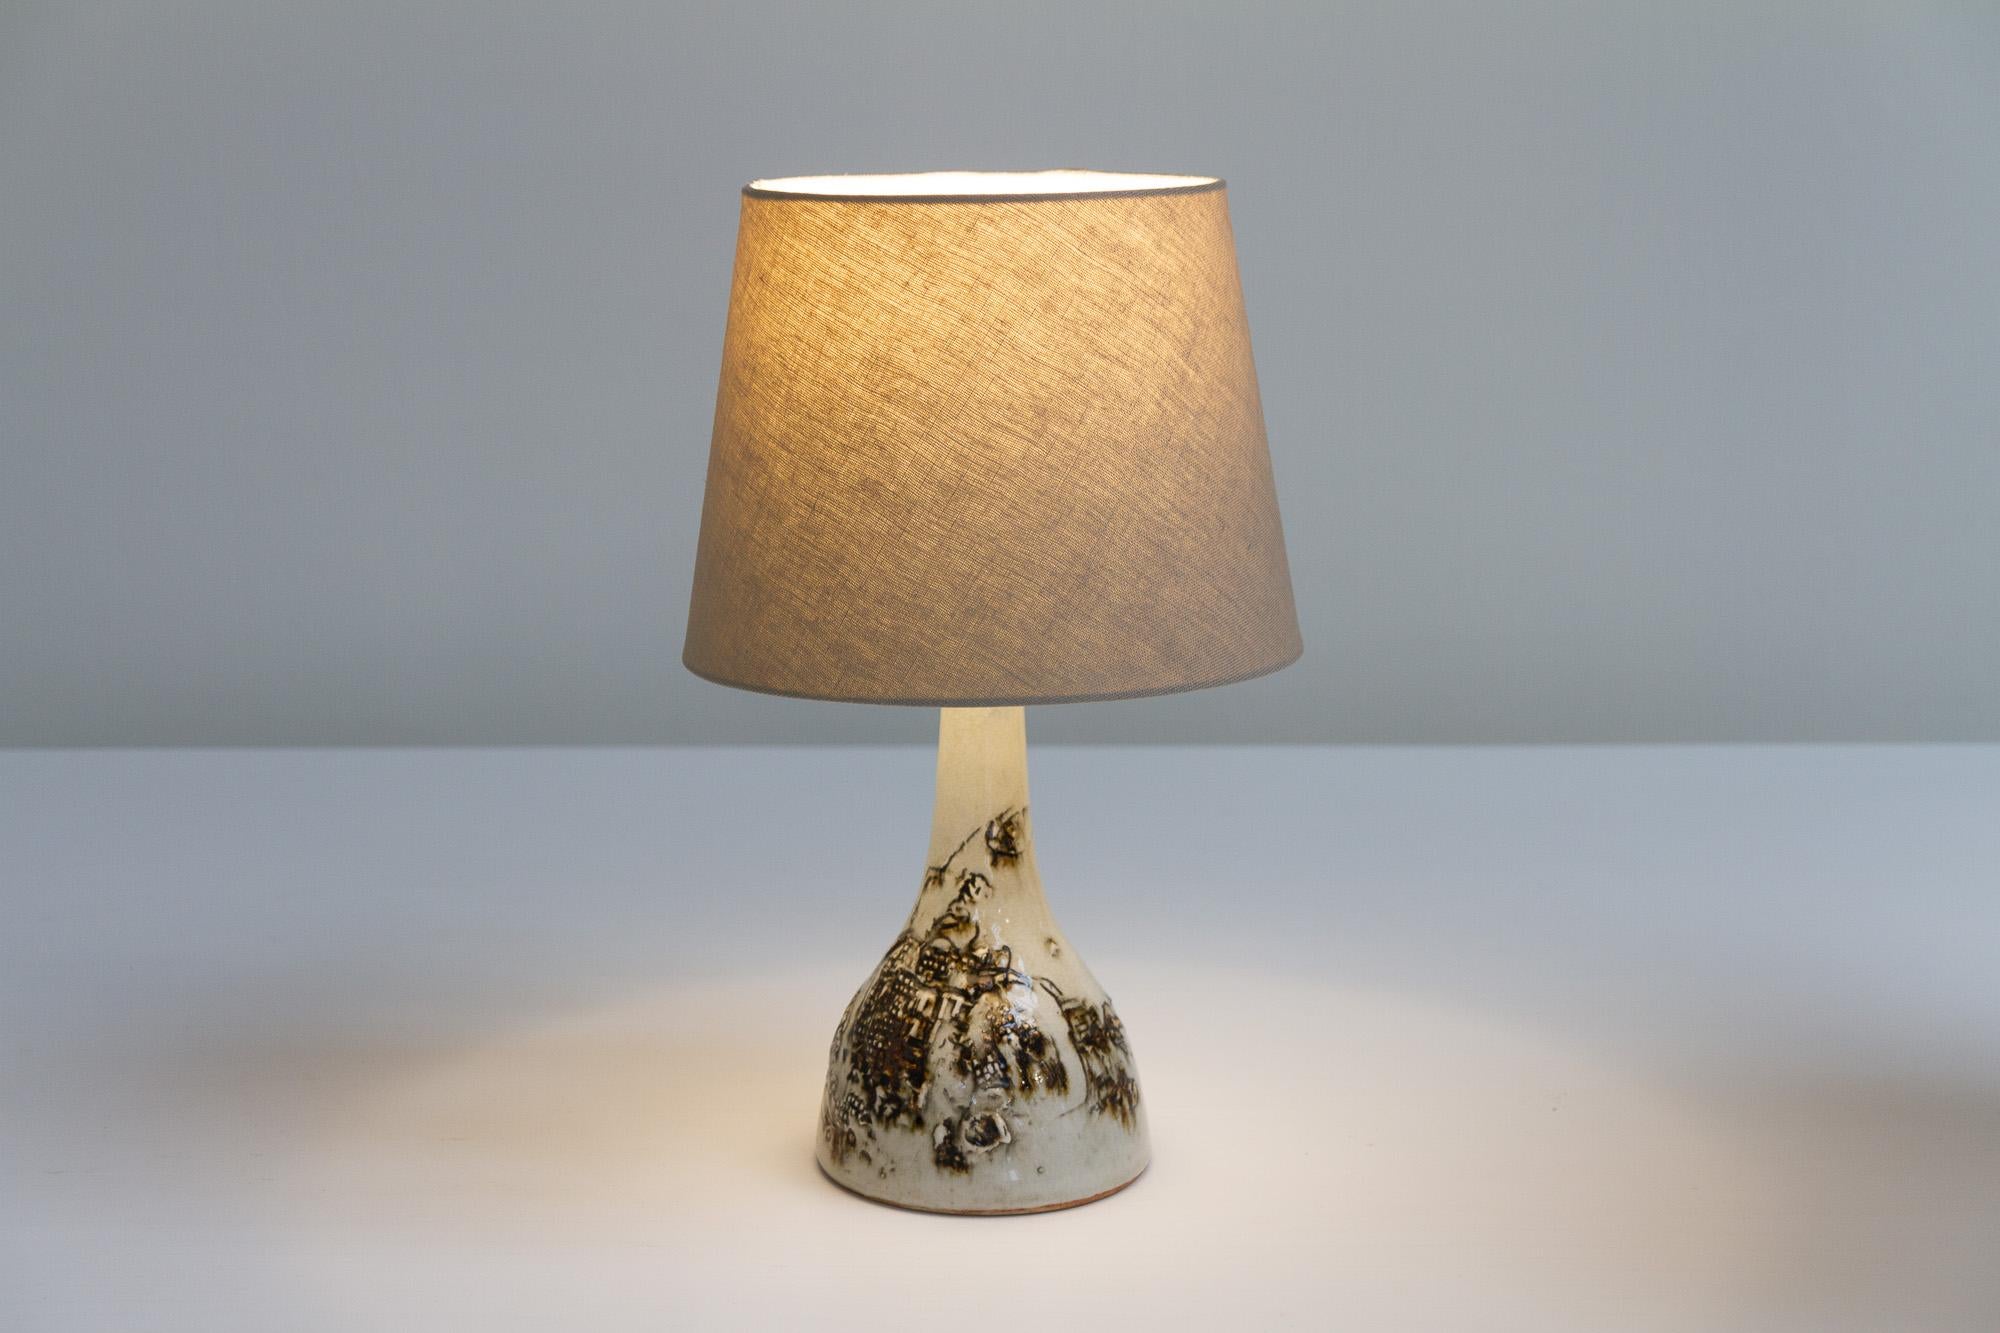 Vintage Danish Brutalist Ceramic Table Lamp by Conny Walther, 1960s For Sale 4